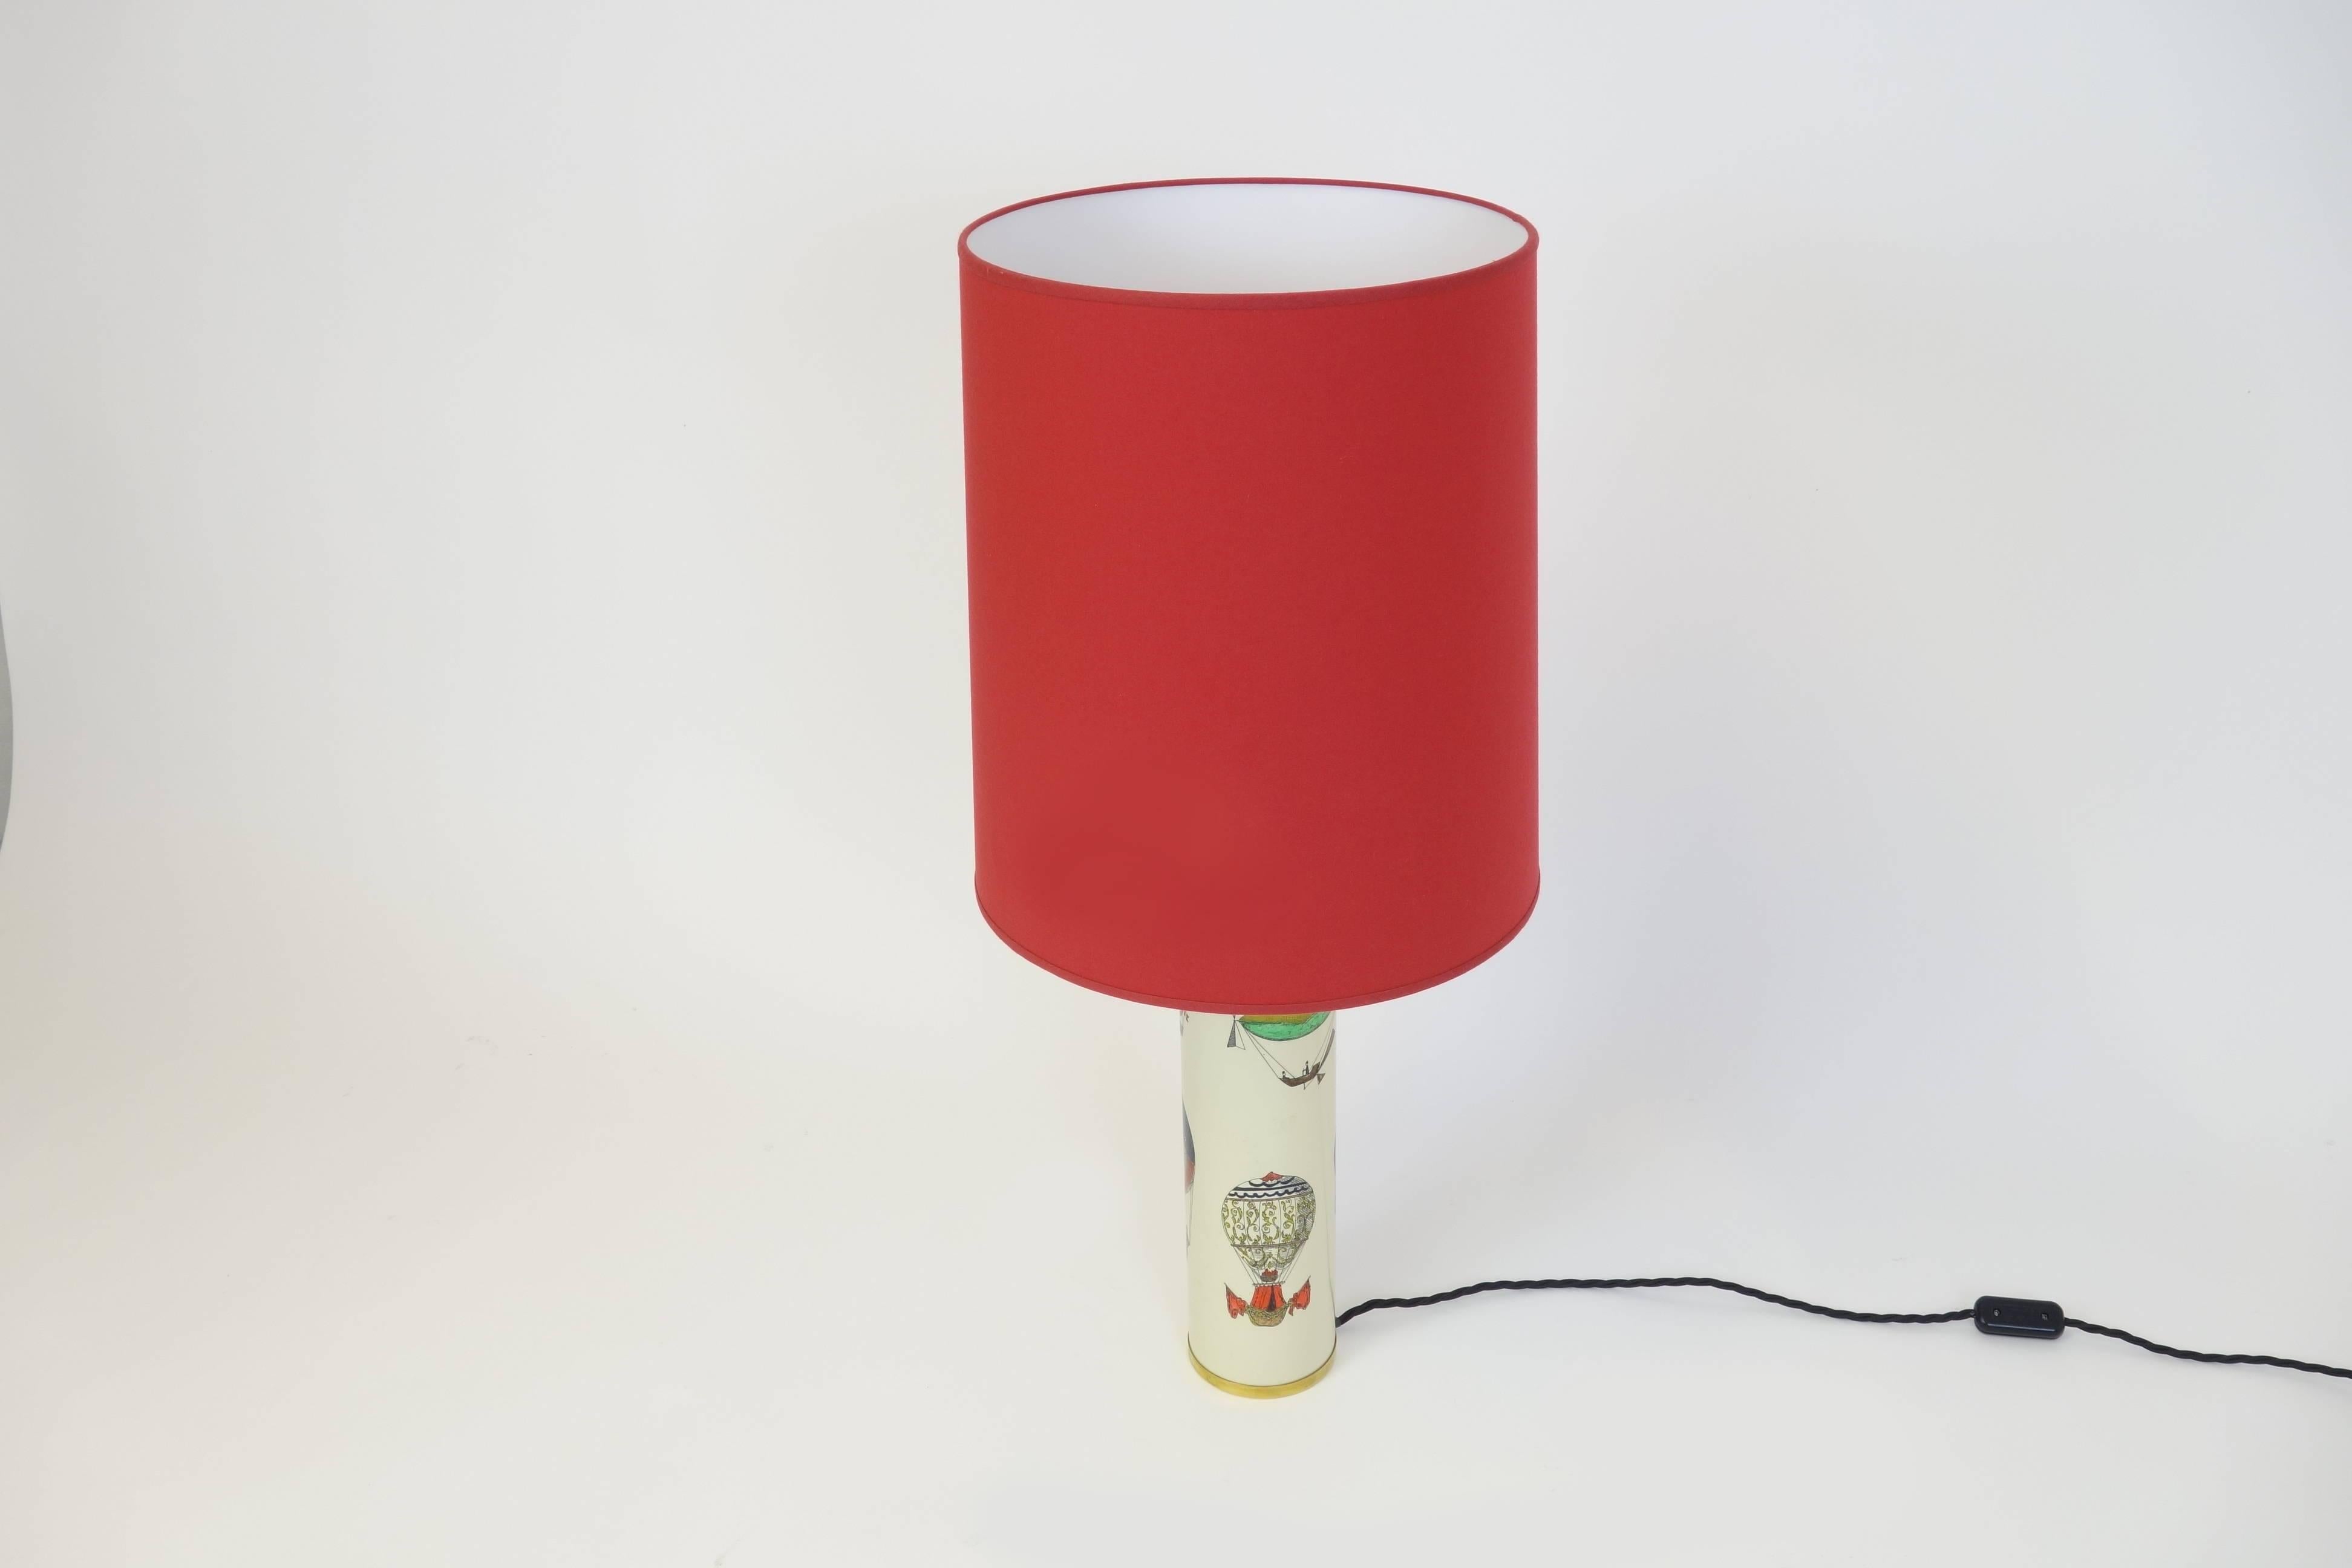 Laminated Table Lamp or Desk Lamp, Furniture by Piero Fornasetti, Milan, Italy For Sale